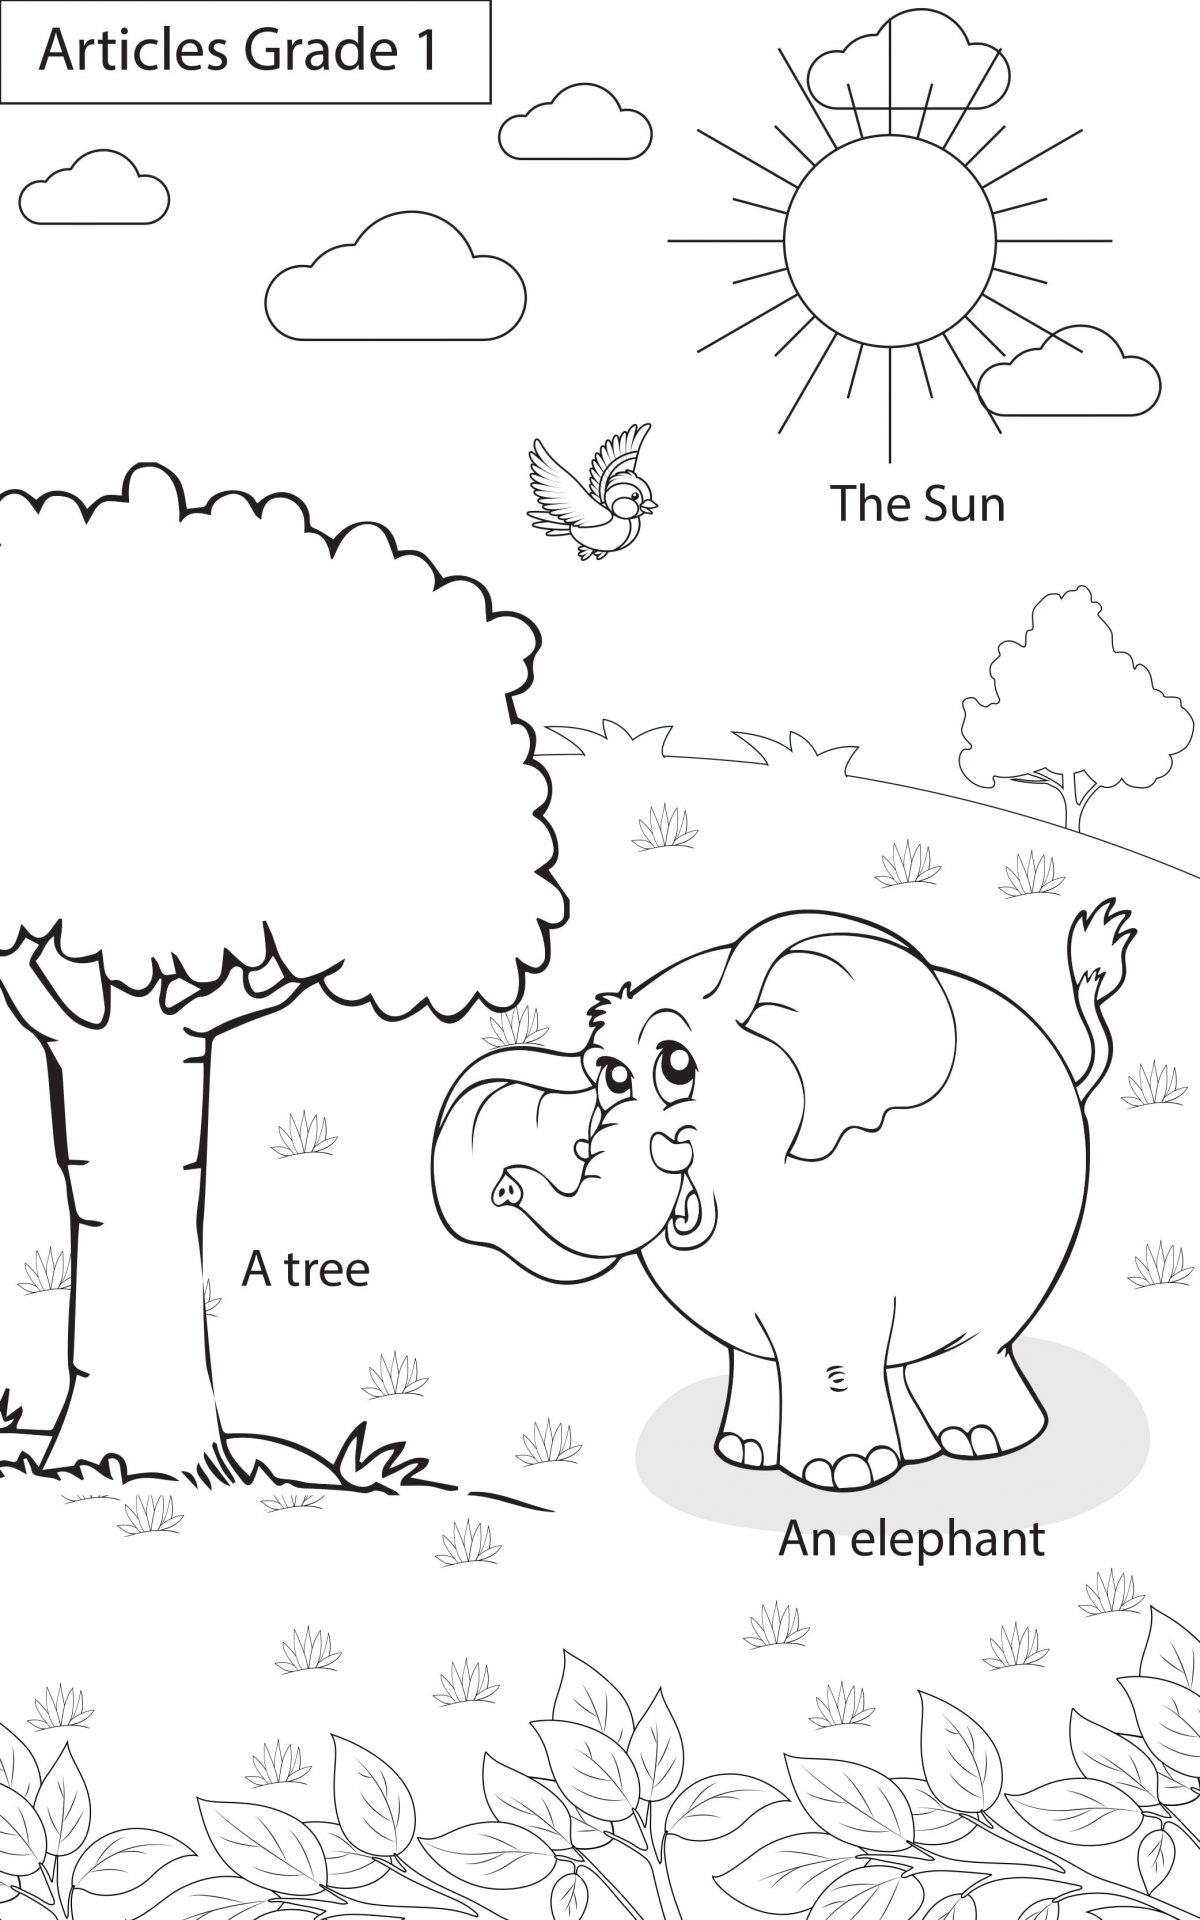 English Worksheets For Grade 1 On Articles